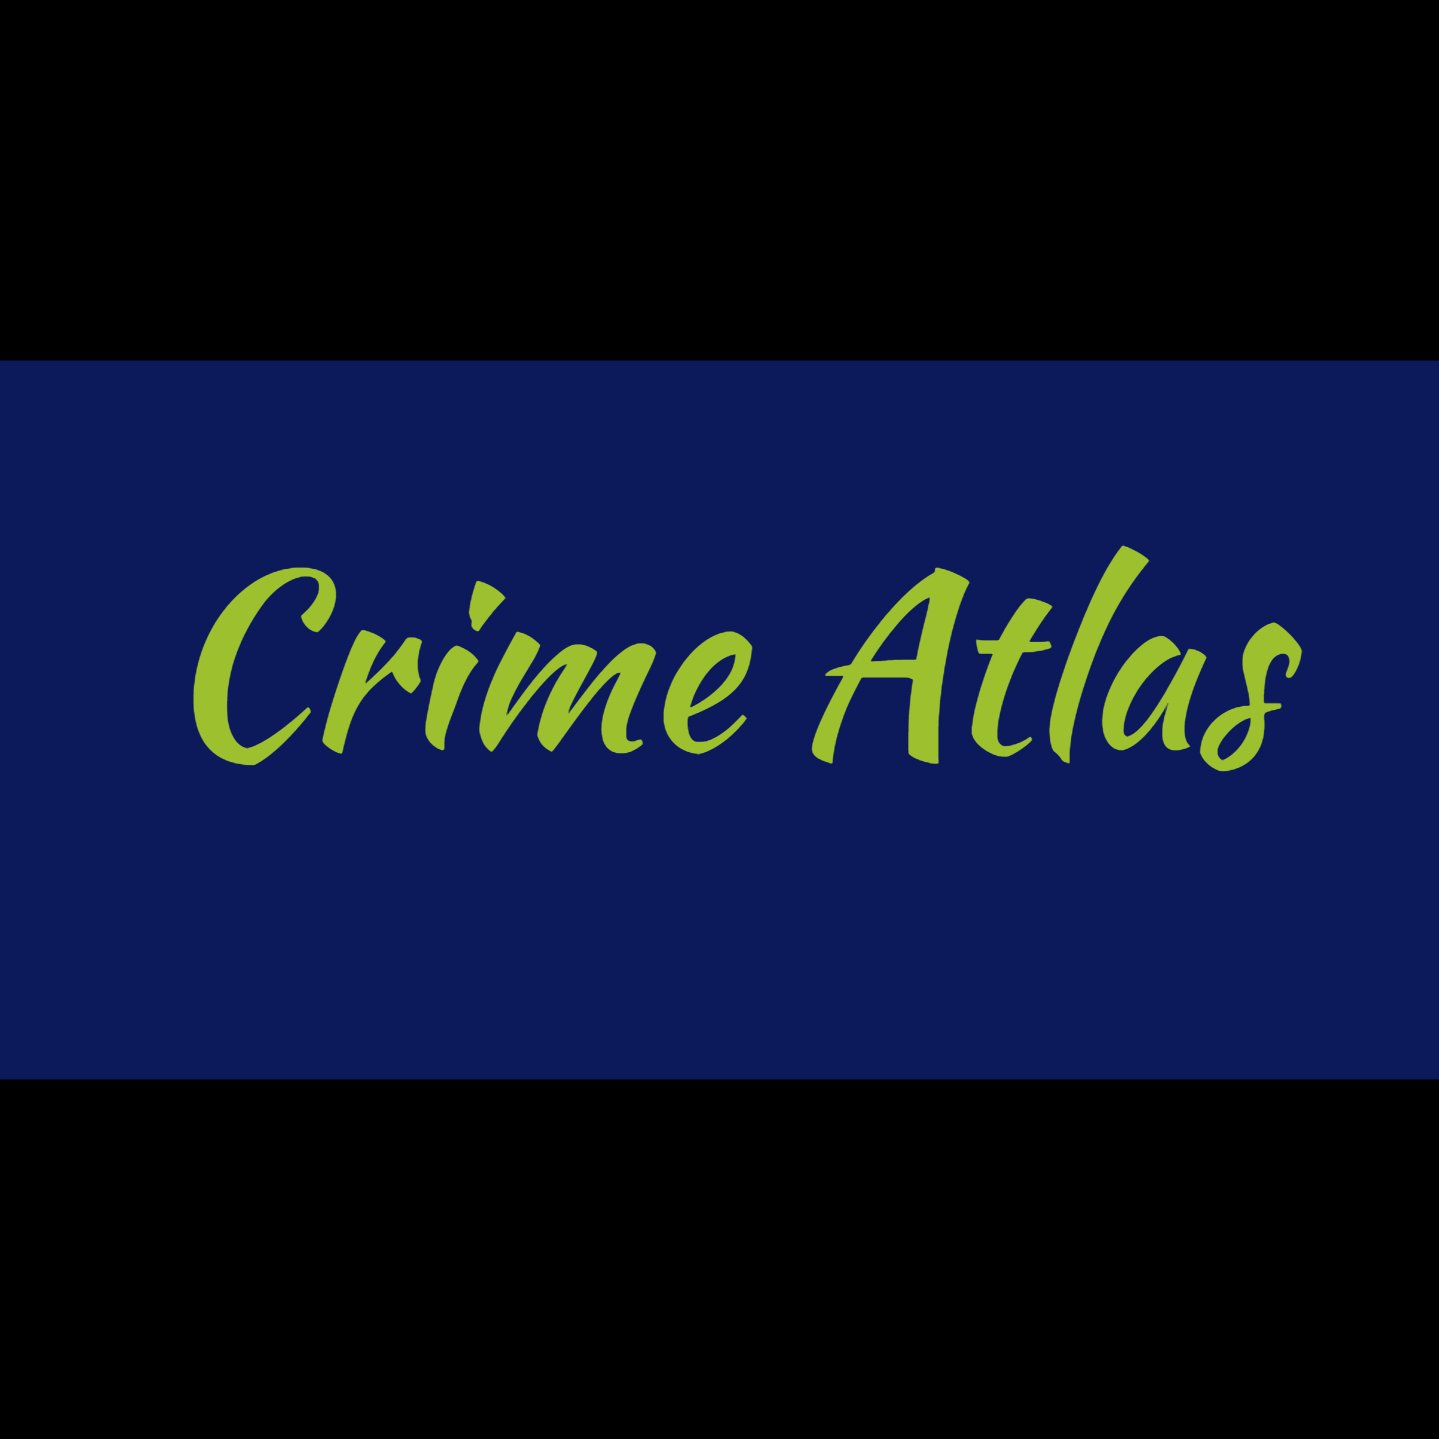 Hello everyone, im a you-tuber who does videos on crimes, current events and criminal justice field.